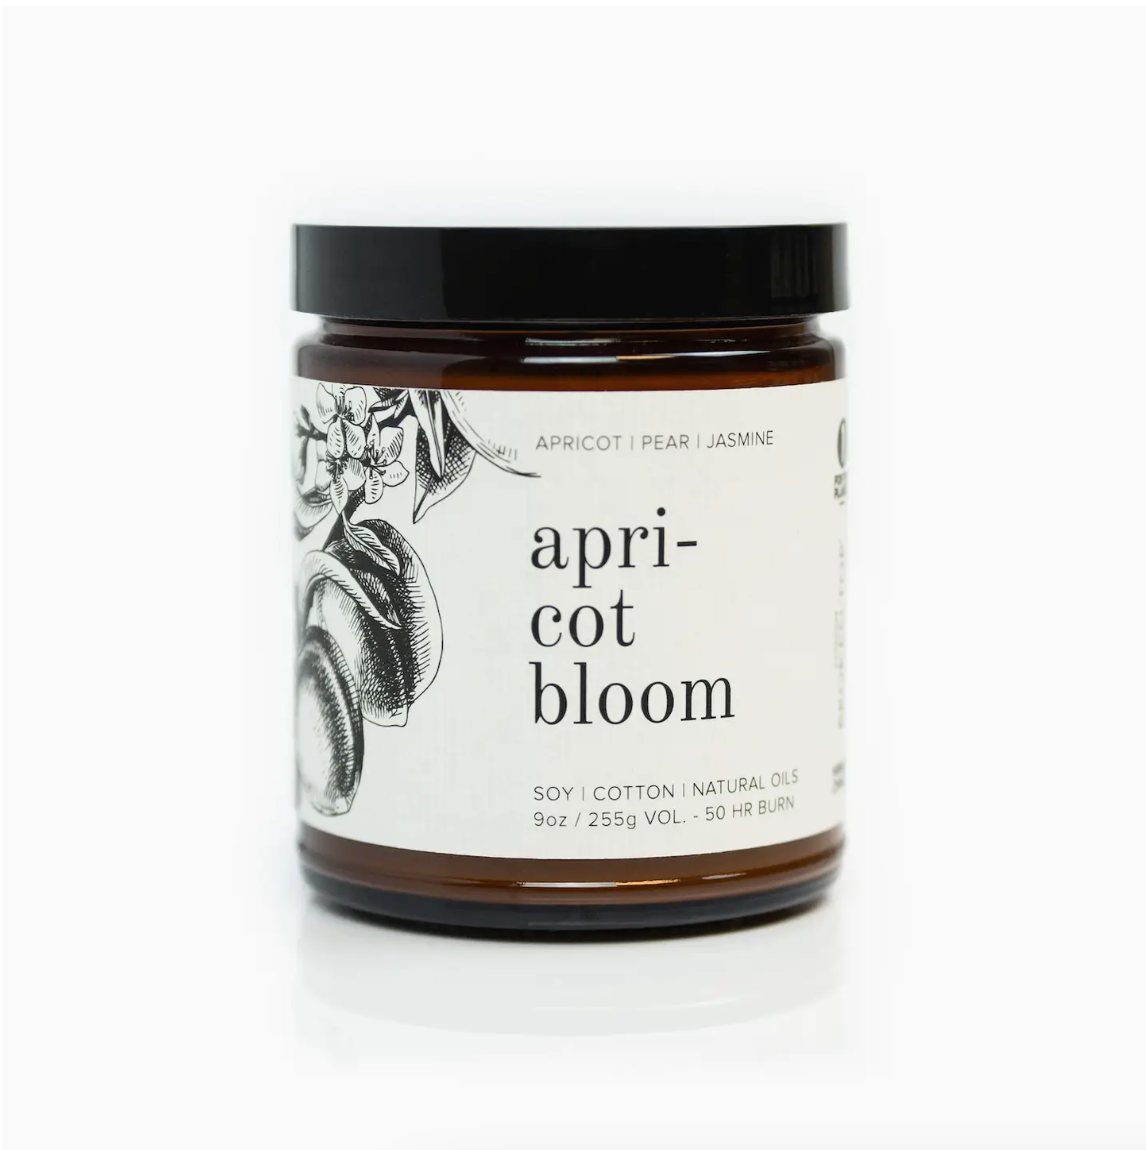 A Faire soy candle in a clear glass jar with a label that reads "Apricot Bloom" and includes illustrations of fruit and flowers. The label mentions cotton, natural oils, and a 50-hour burn time.